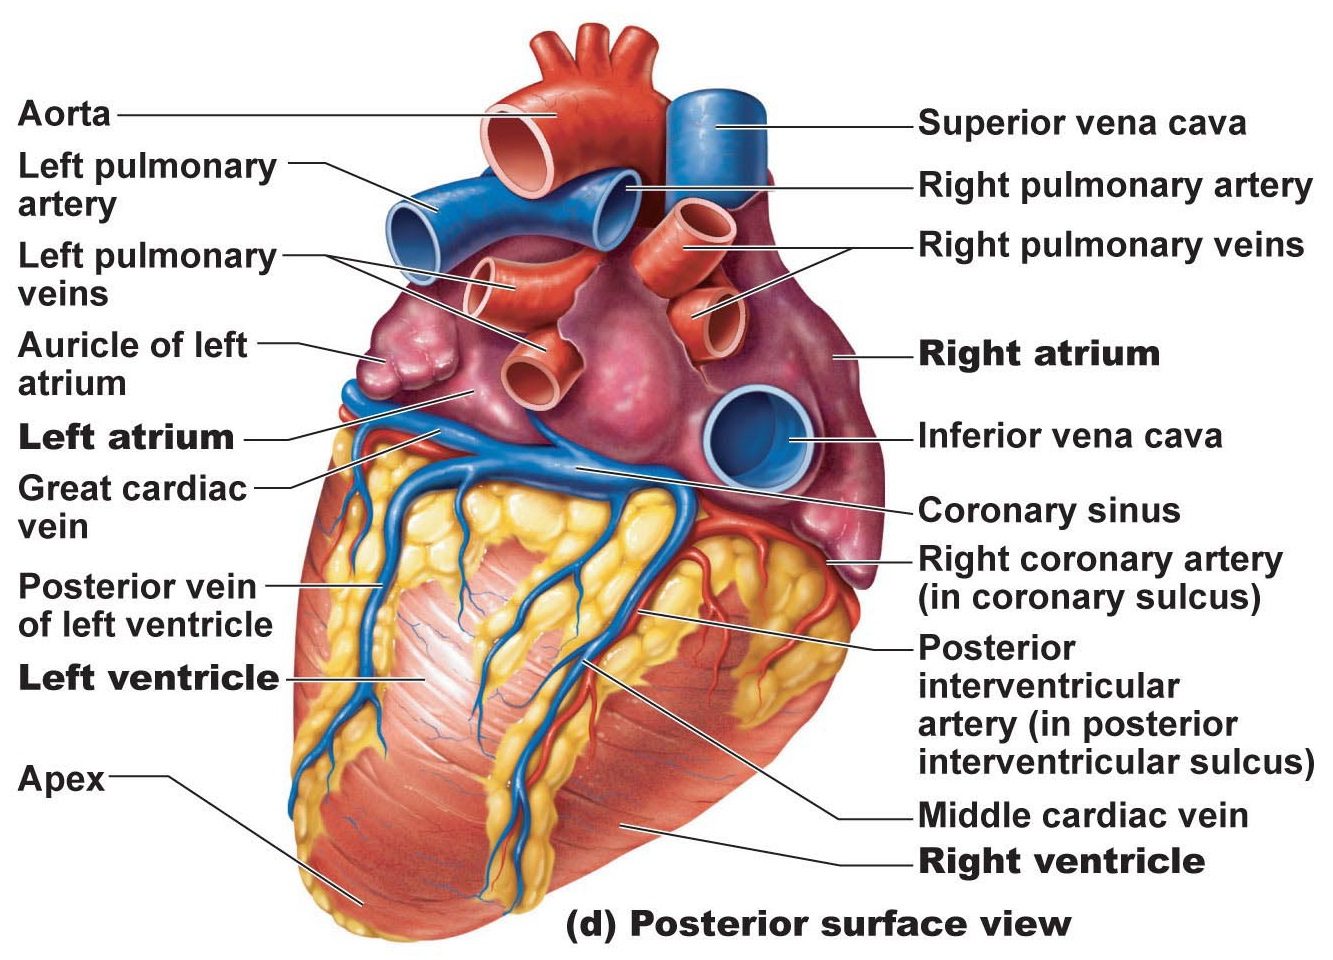 Posterior-surface-view-of-the-human-heart